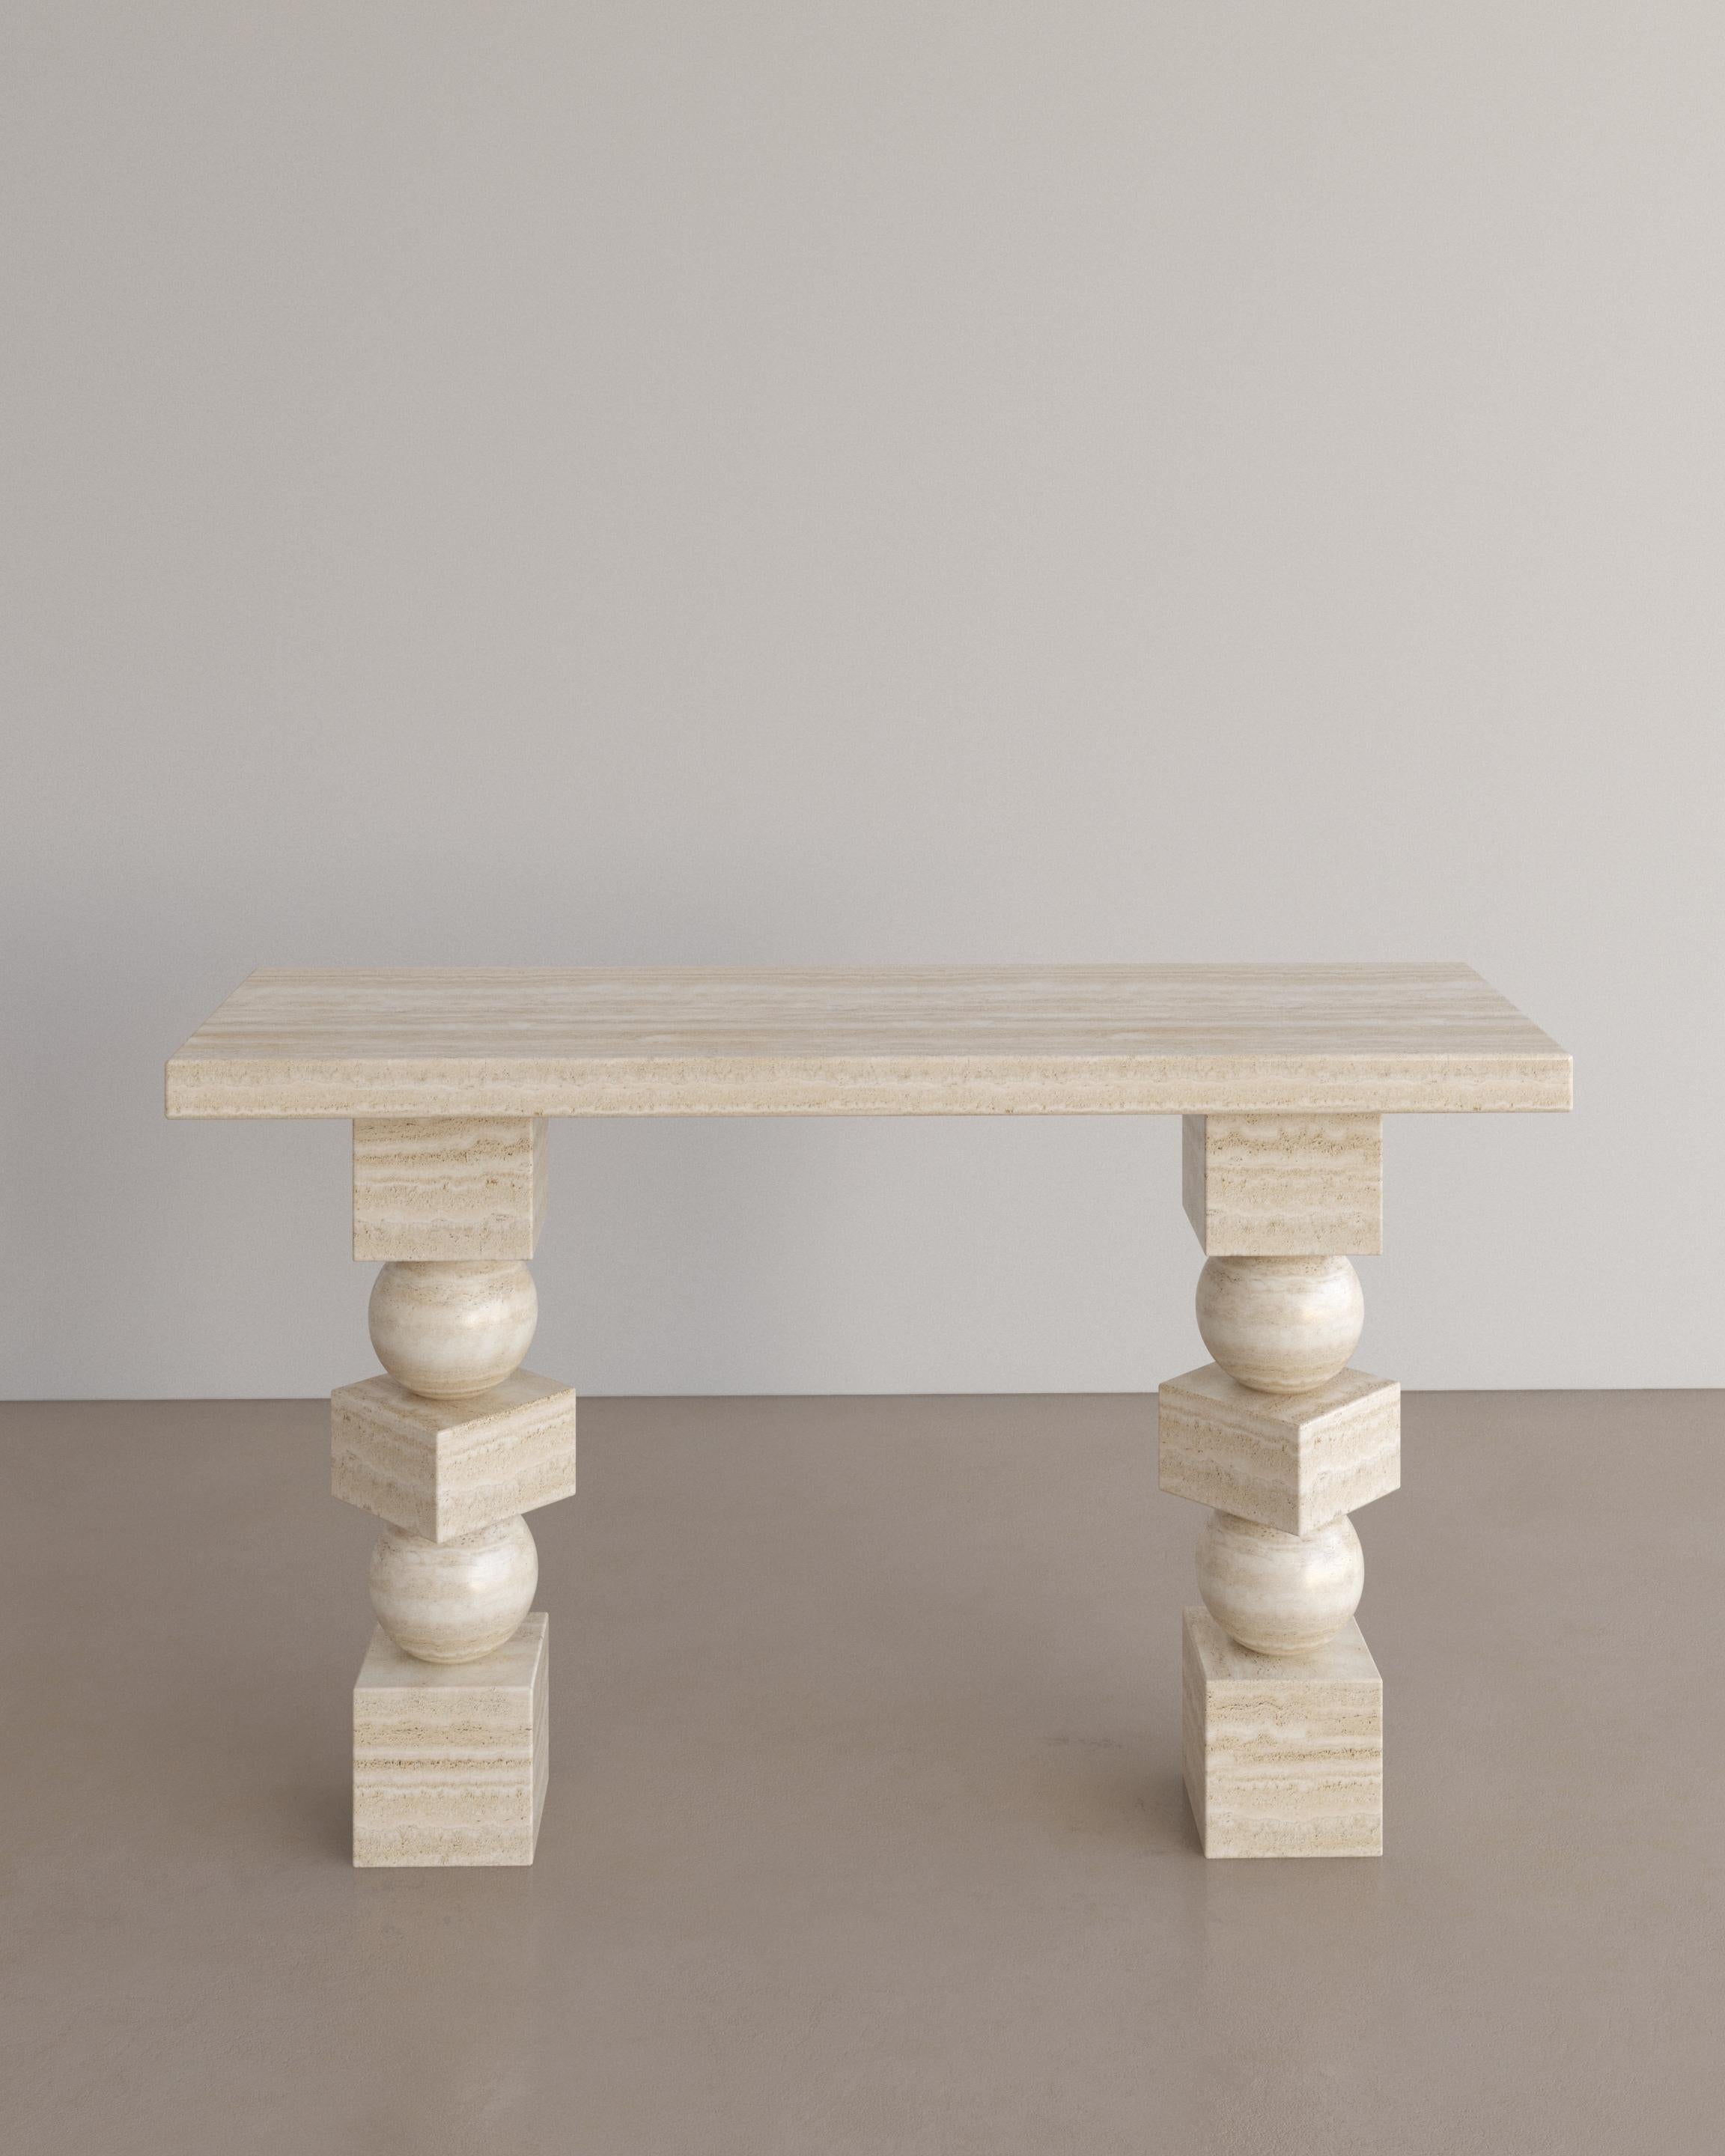 The Sufi Console Table celebrates proportion, scale and ancestral power. Three simple geometric shapes, stacked in a sequence bursts with undeniable energy, courtesy of the natural stone they are carved from. A generous table top defines its